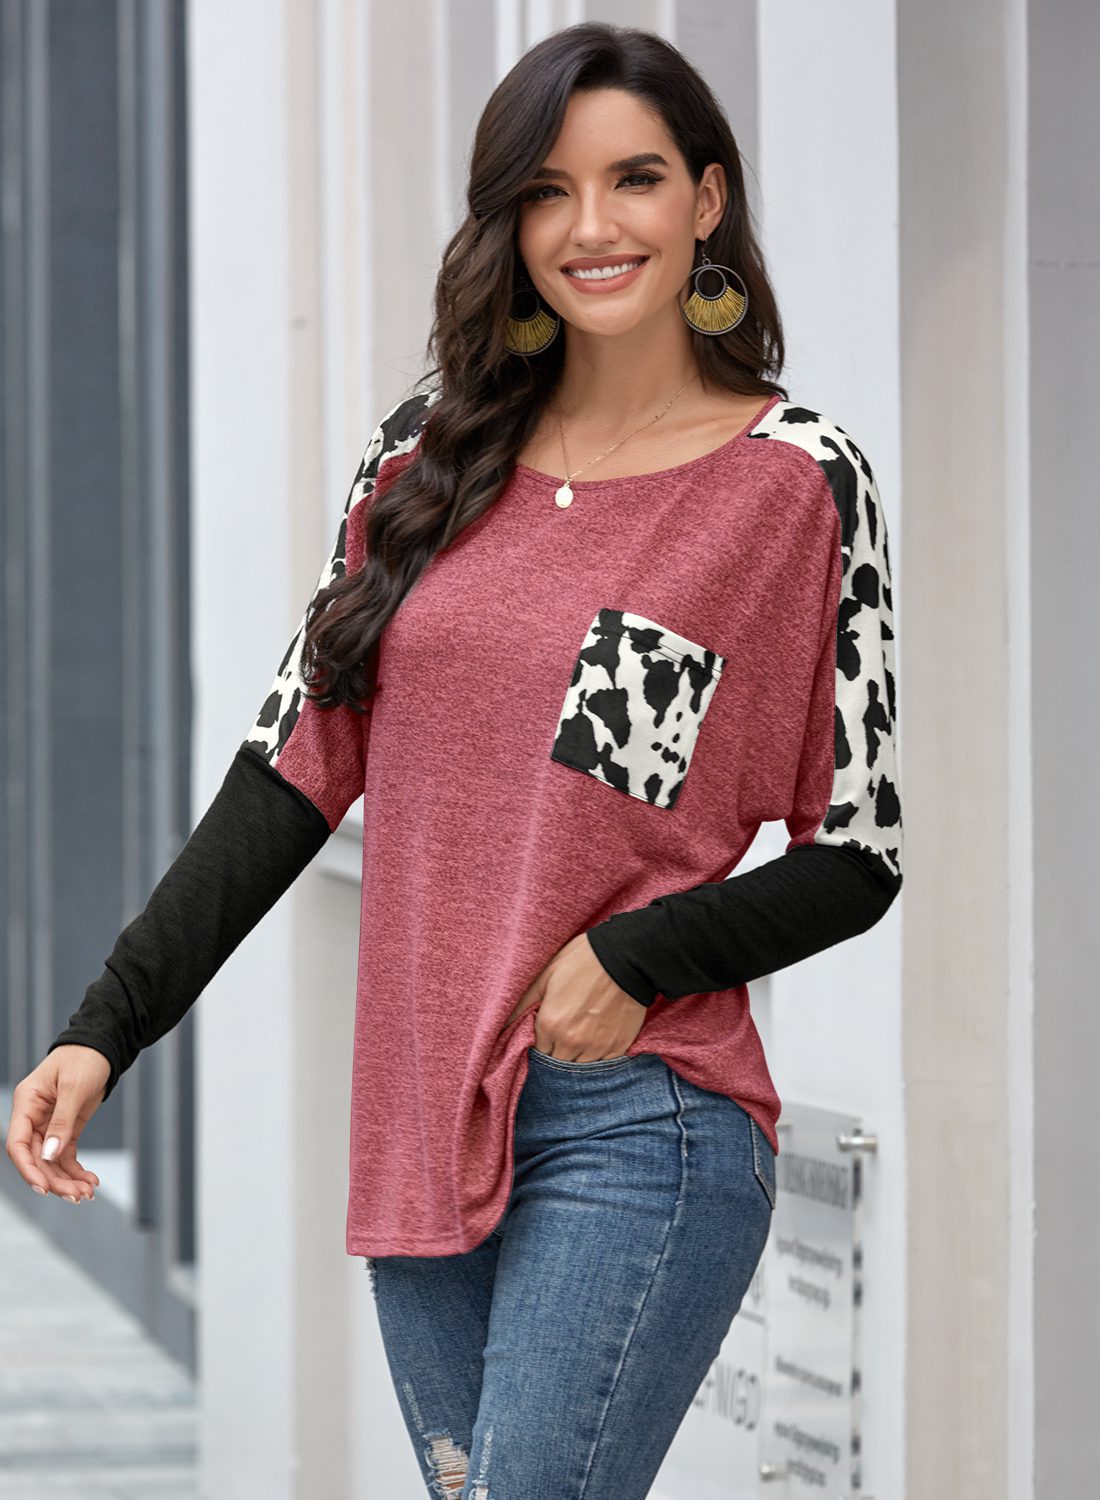 Round Collar Hoodie With Patterned Patchwork Casual Knit Top - Hoodies & Sweatshirts - Uniqistic.com